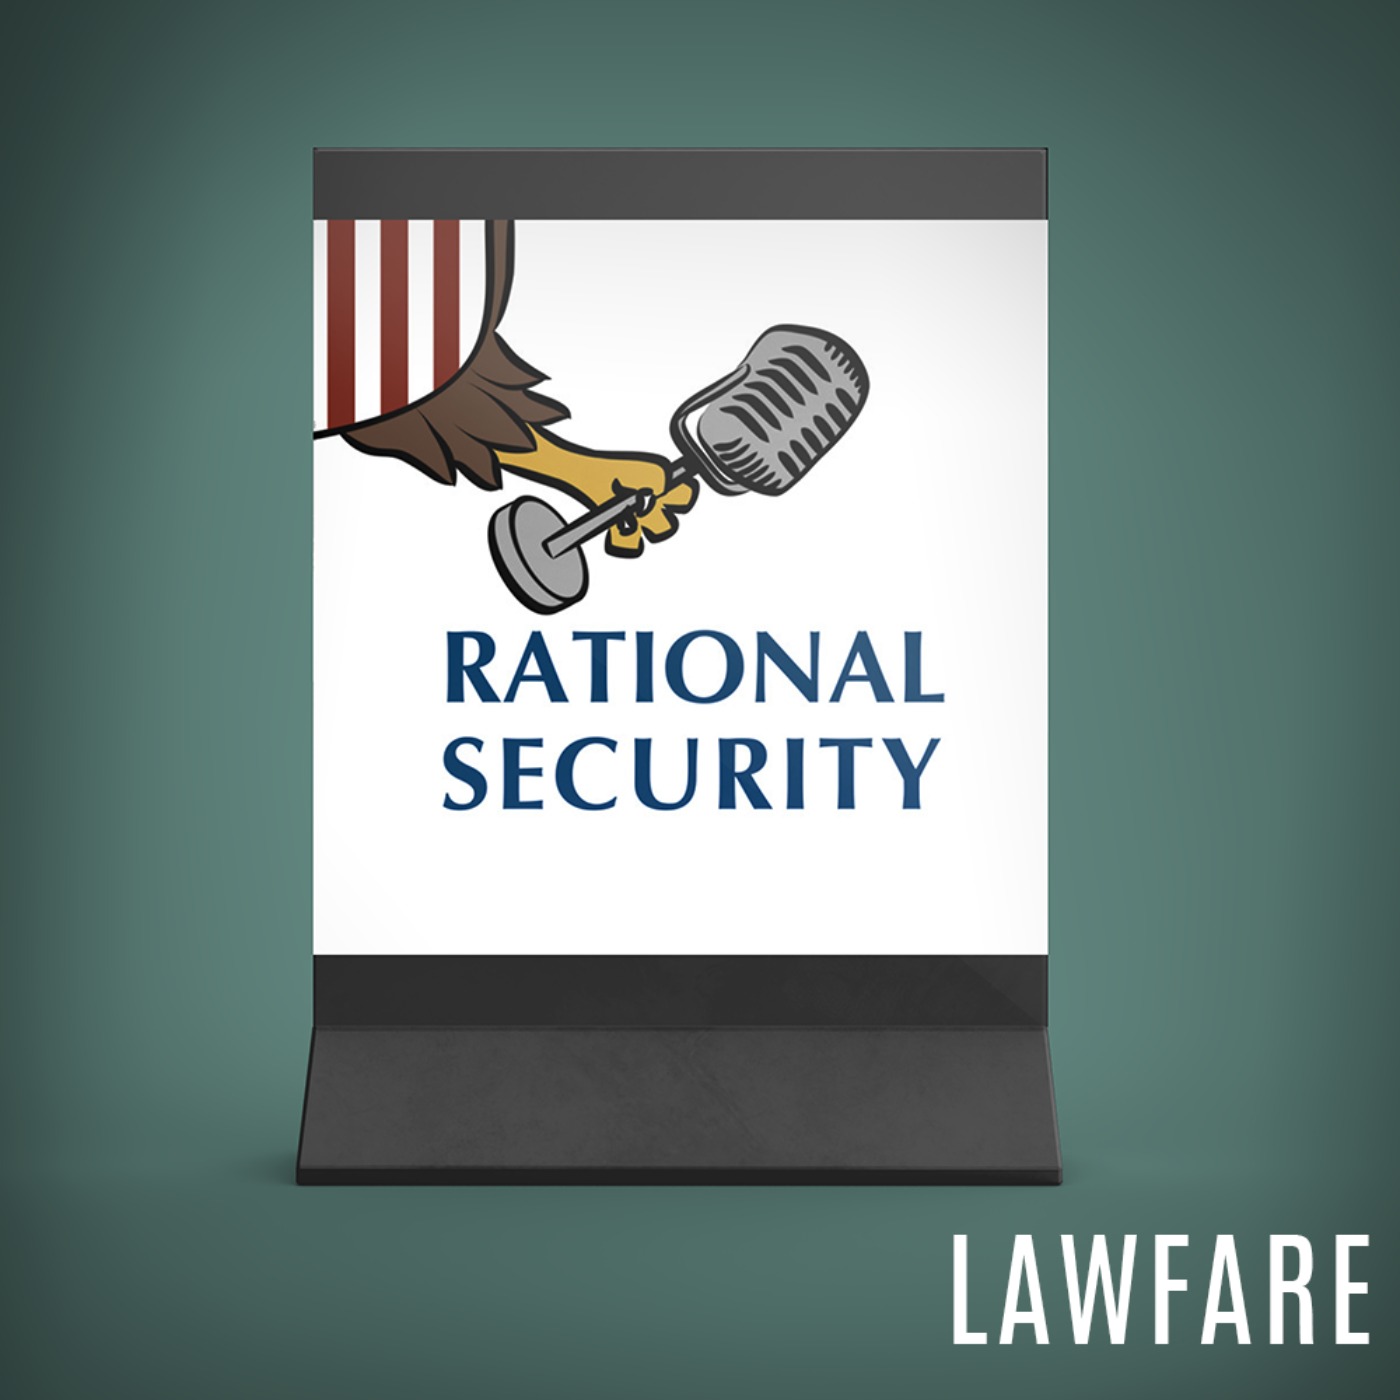 Rational Security: The “Pétanque-a-Donk” Edition